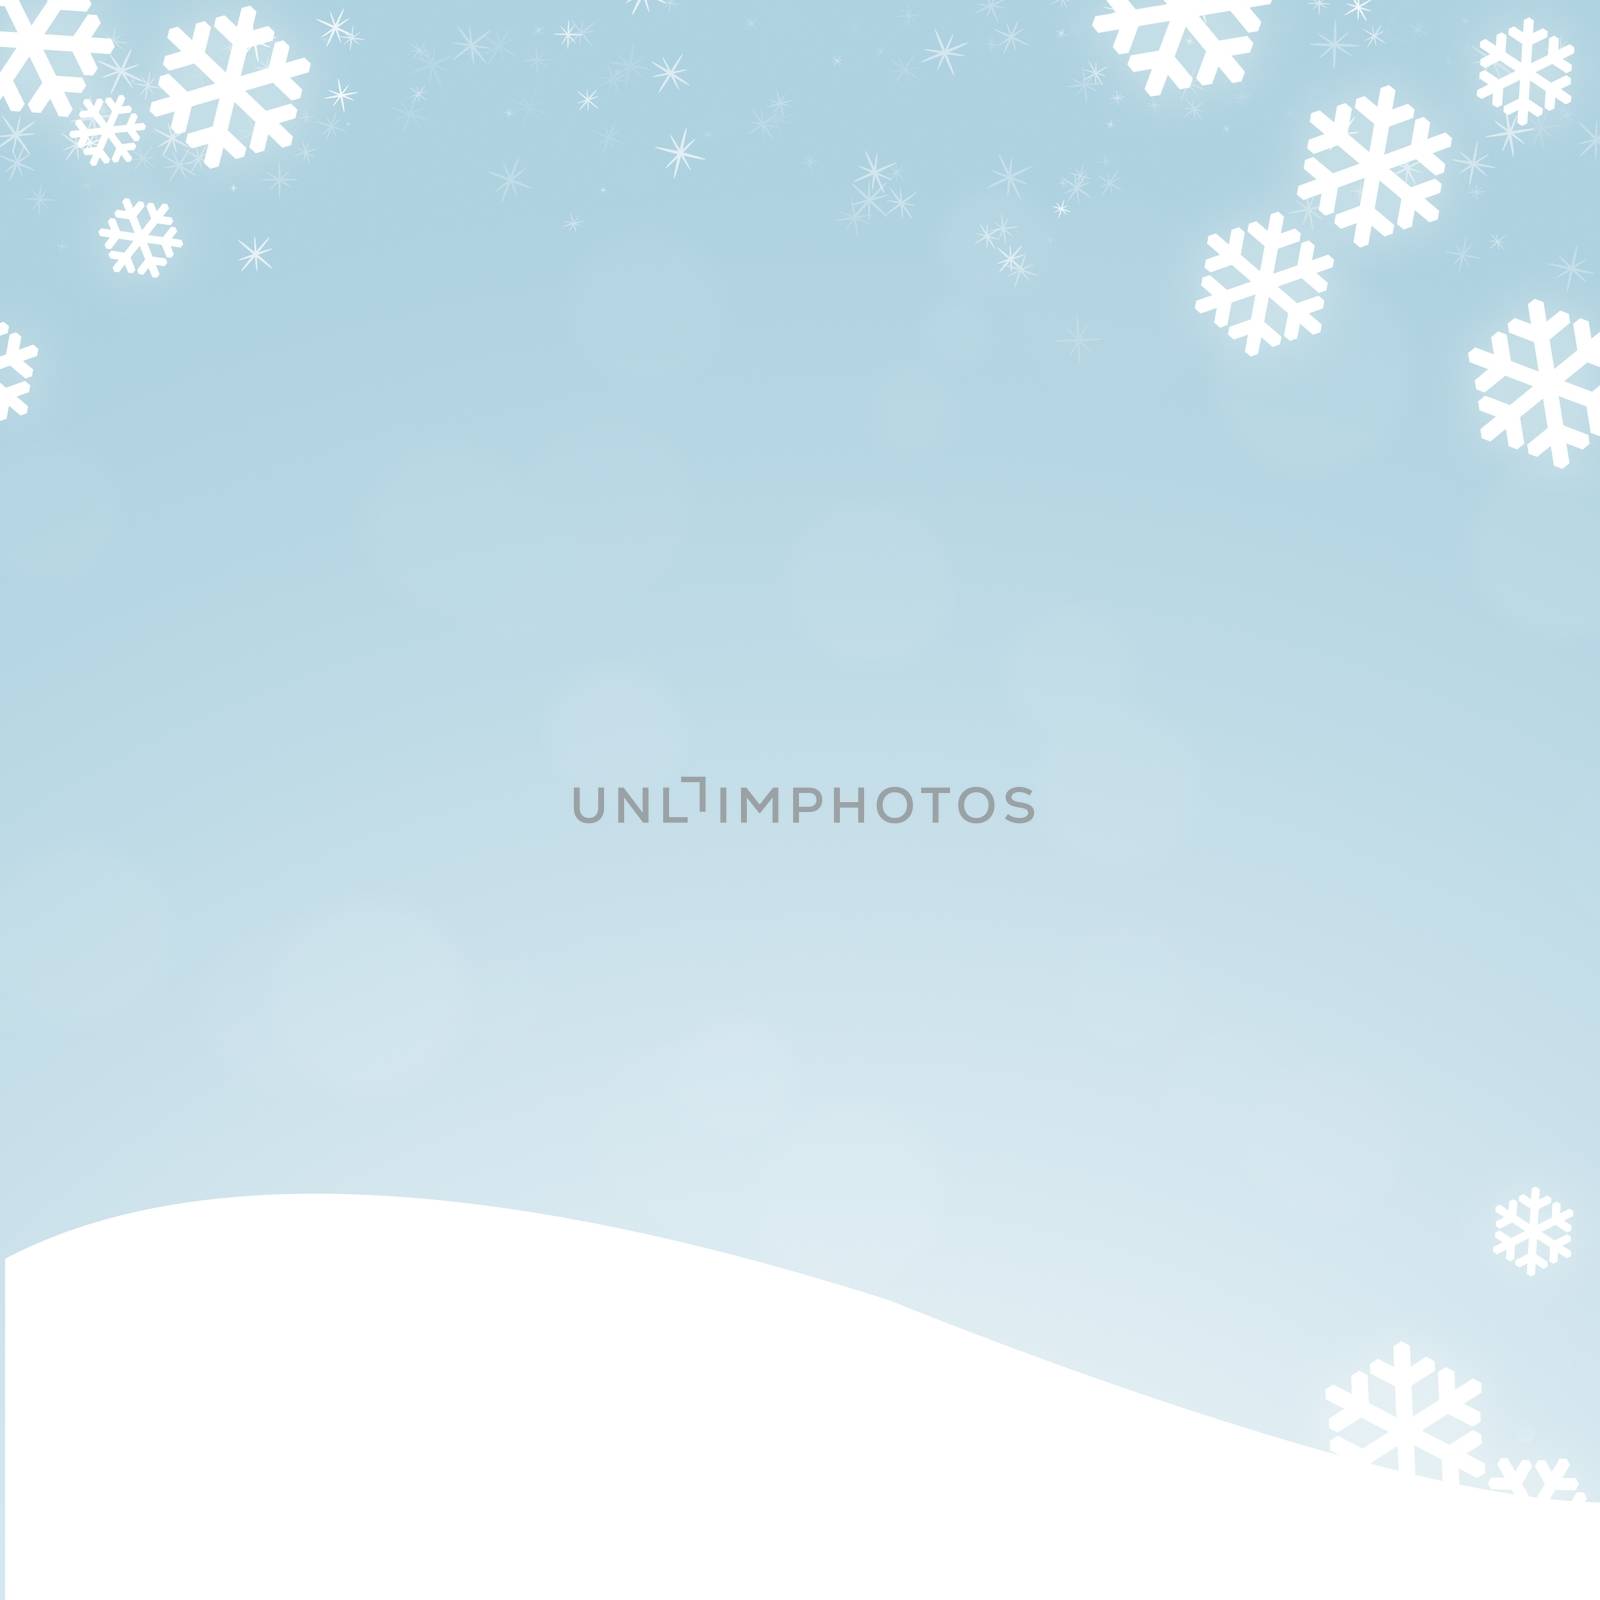 Christmas card background with snow flakes by simpson33